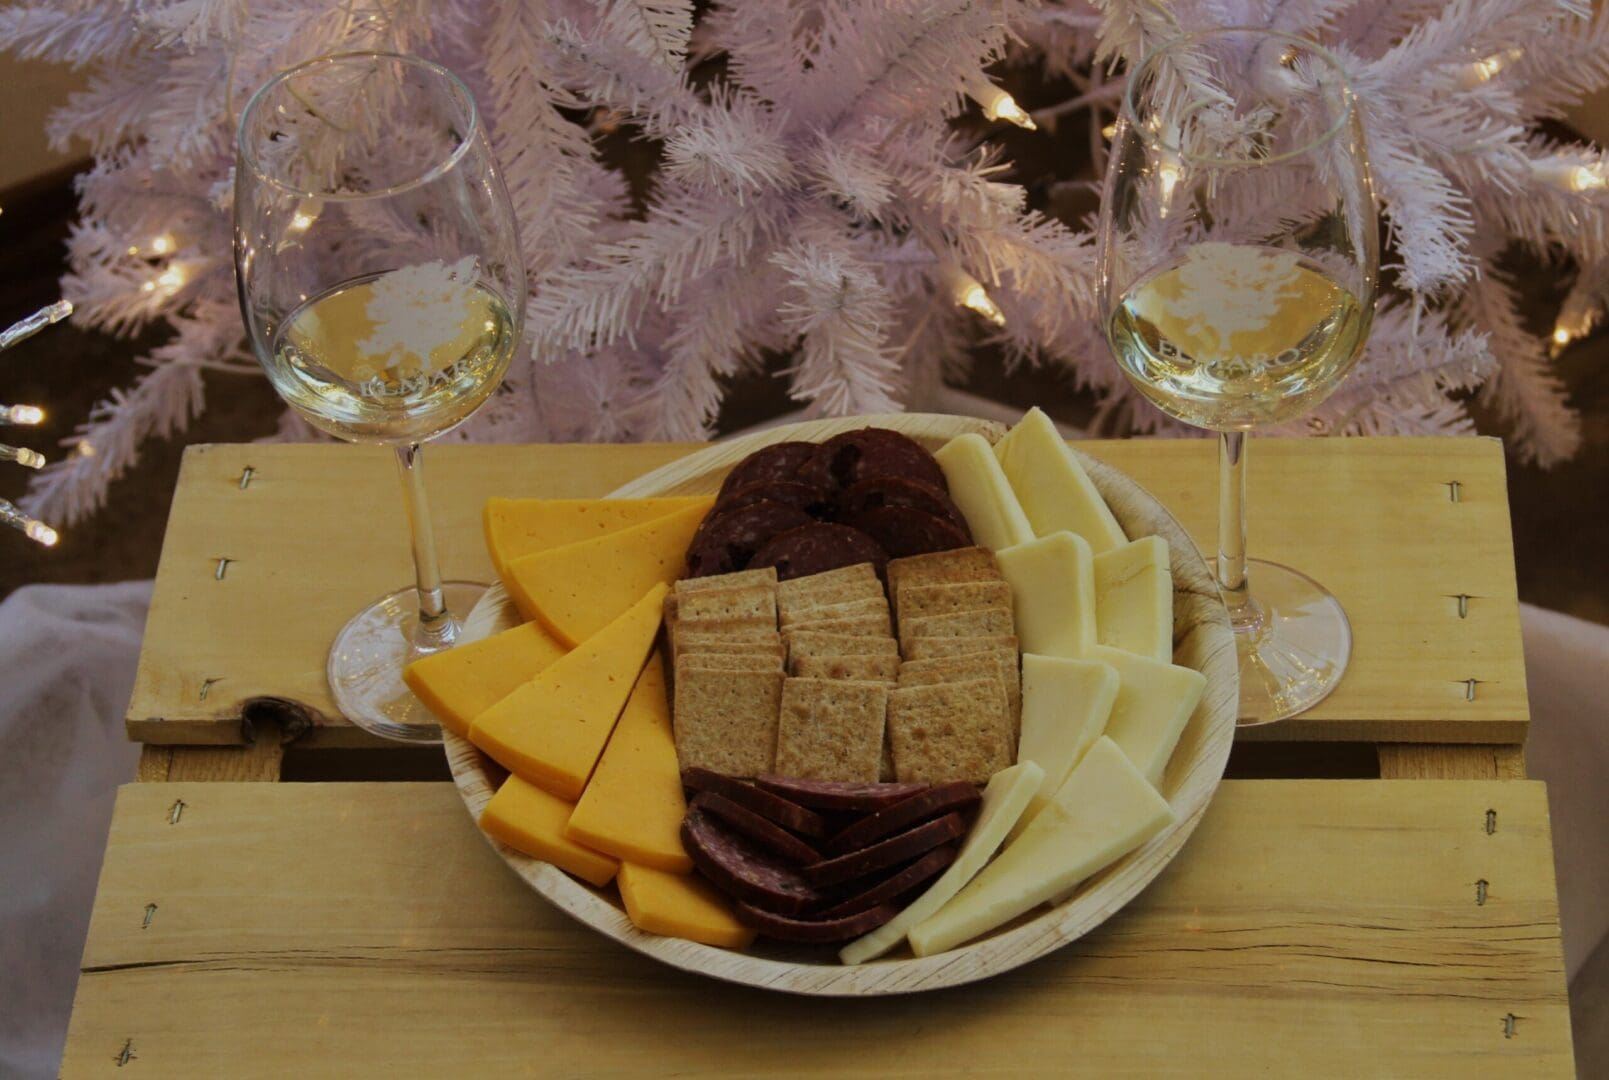 A plate of cheese, crackers, and wine glasses on a wooden crate.